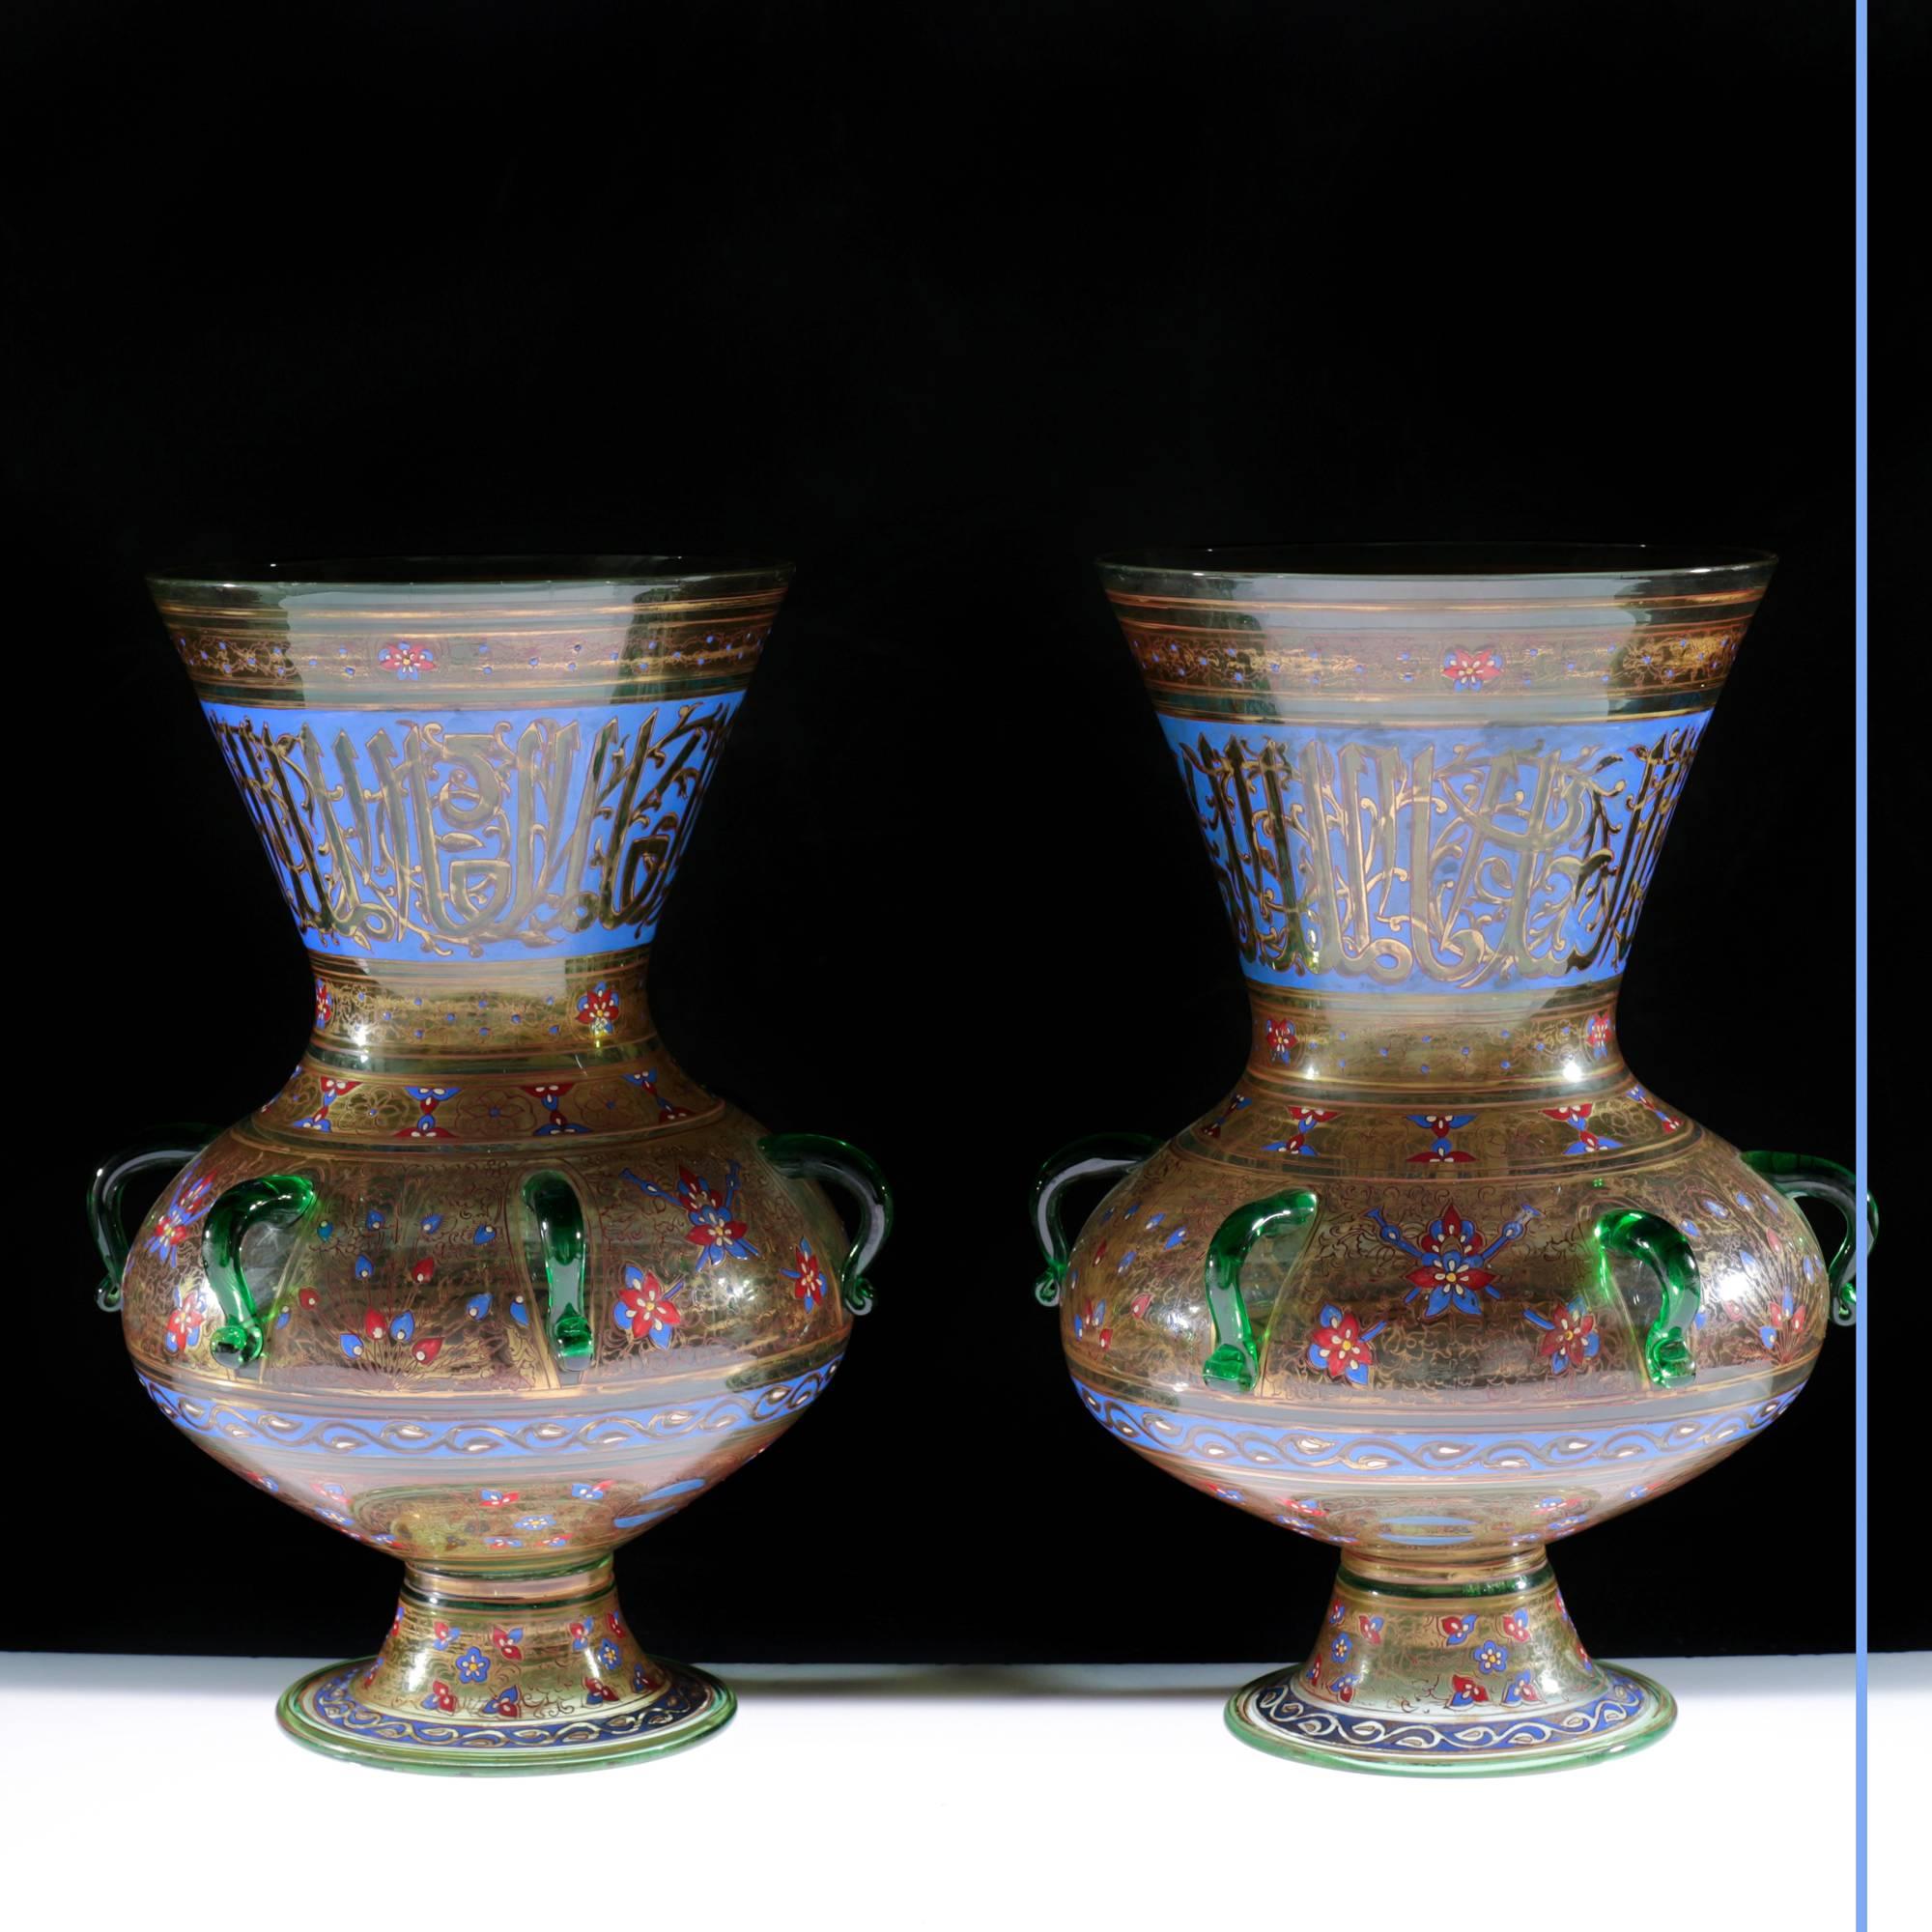 Philippe-Joseph Brocard (1831-1896). 
A Pair of Polychrom Enamelled Glass mosque lamps.
In the islamic tradition, notably Mamelouk period
Painted blown glass, calligraphic inscriptions,
19th century,
Paris, circa 1870.
Measures: H 37 cm, D 25